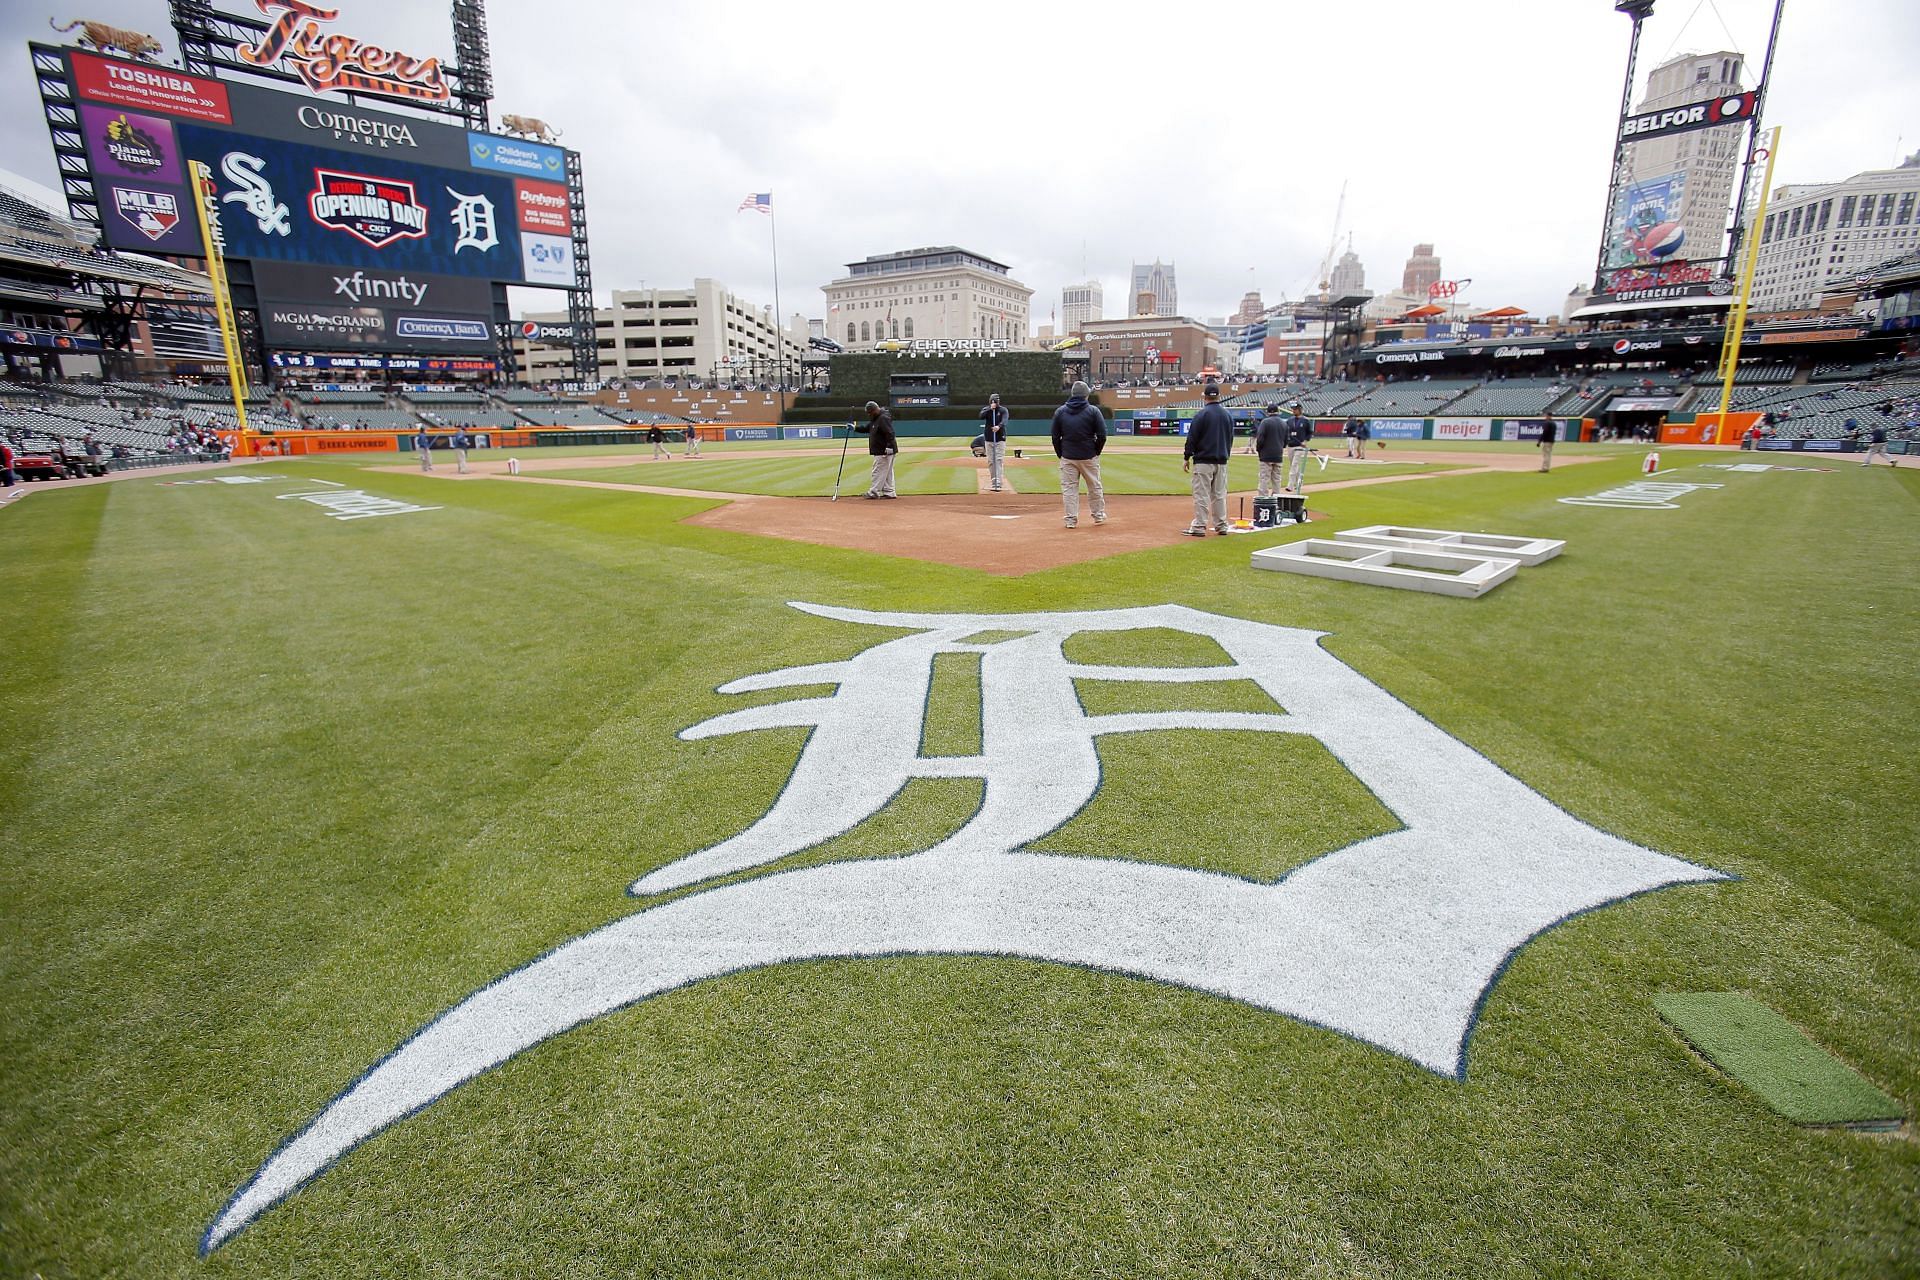 The Detroit Tigers are off to a decent start